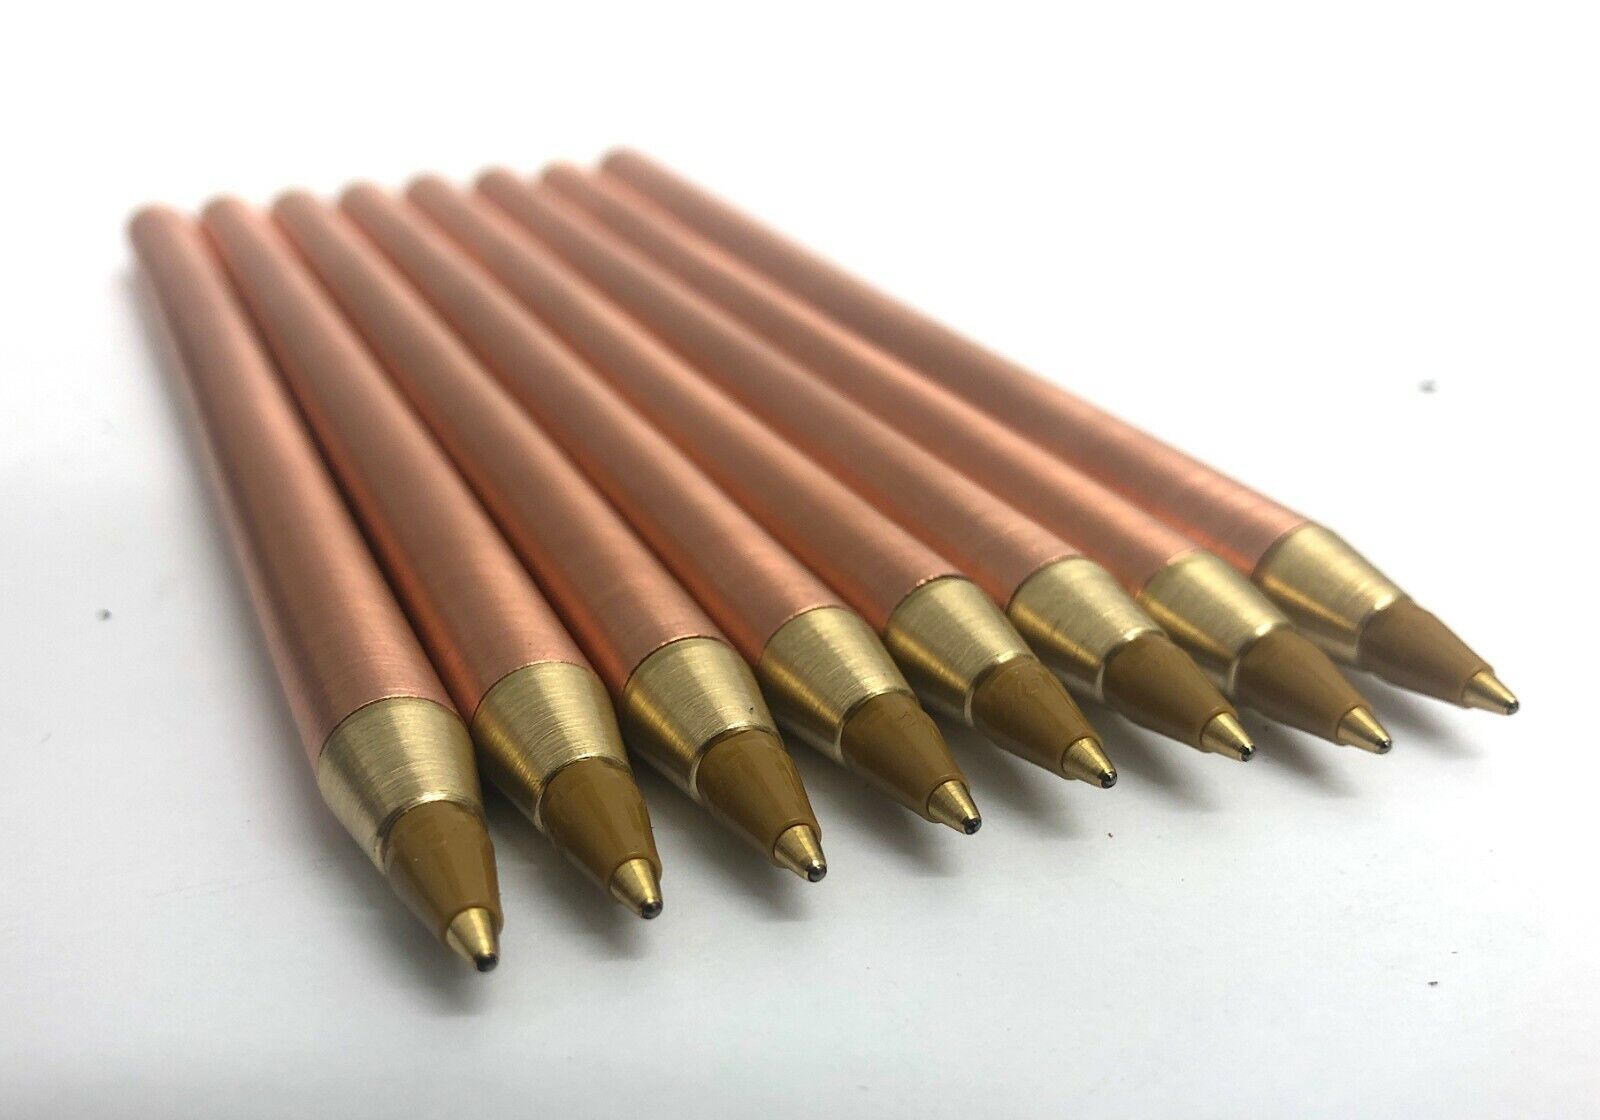 Copper Ball point pen Anti Microbial | Anti Viral pen Copper and Brass